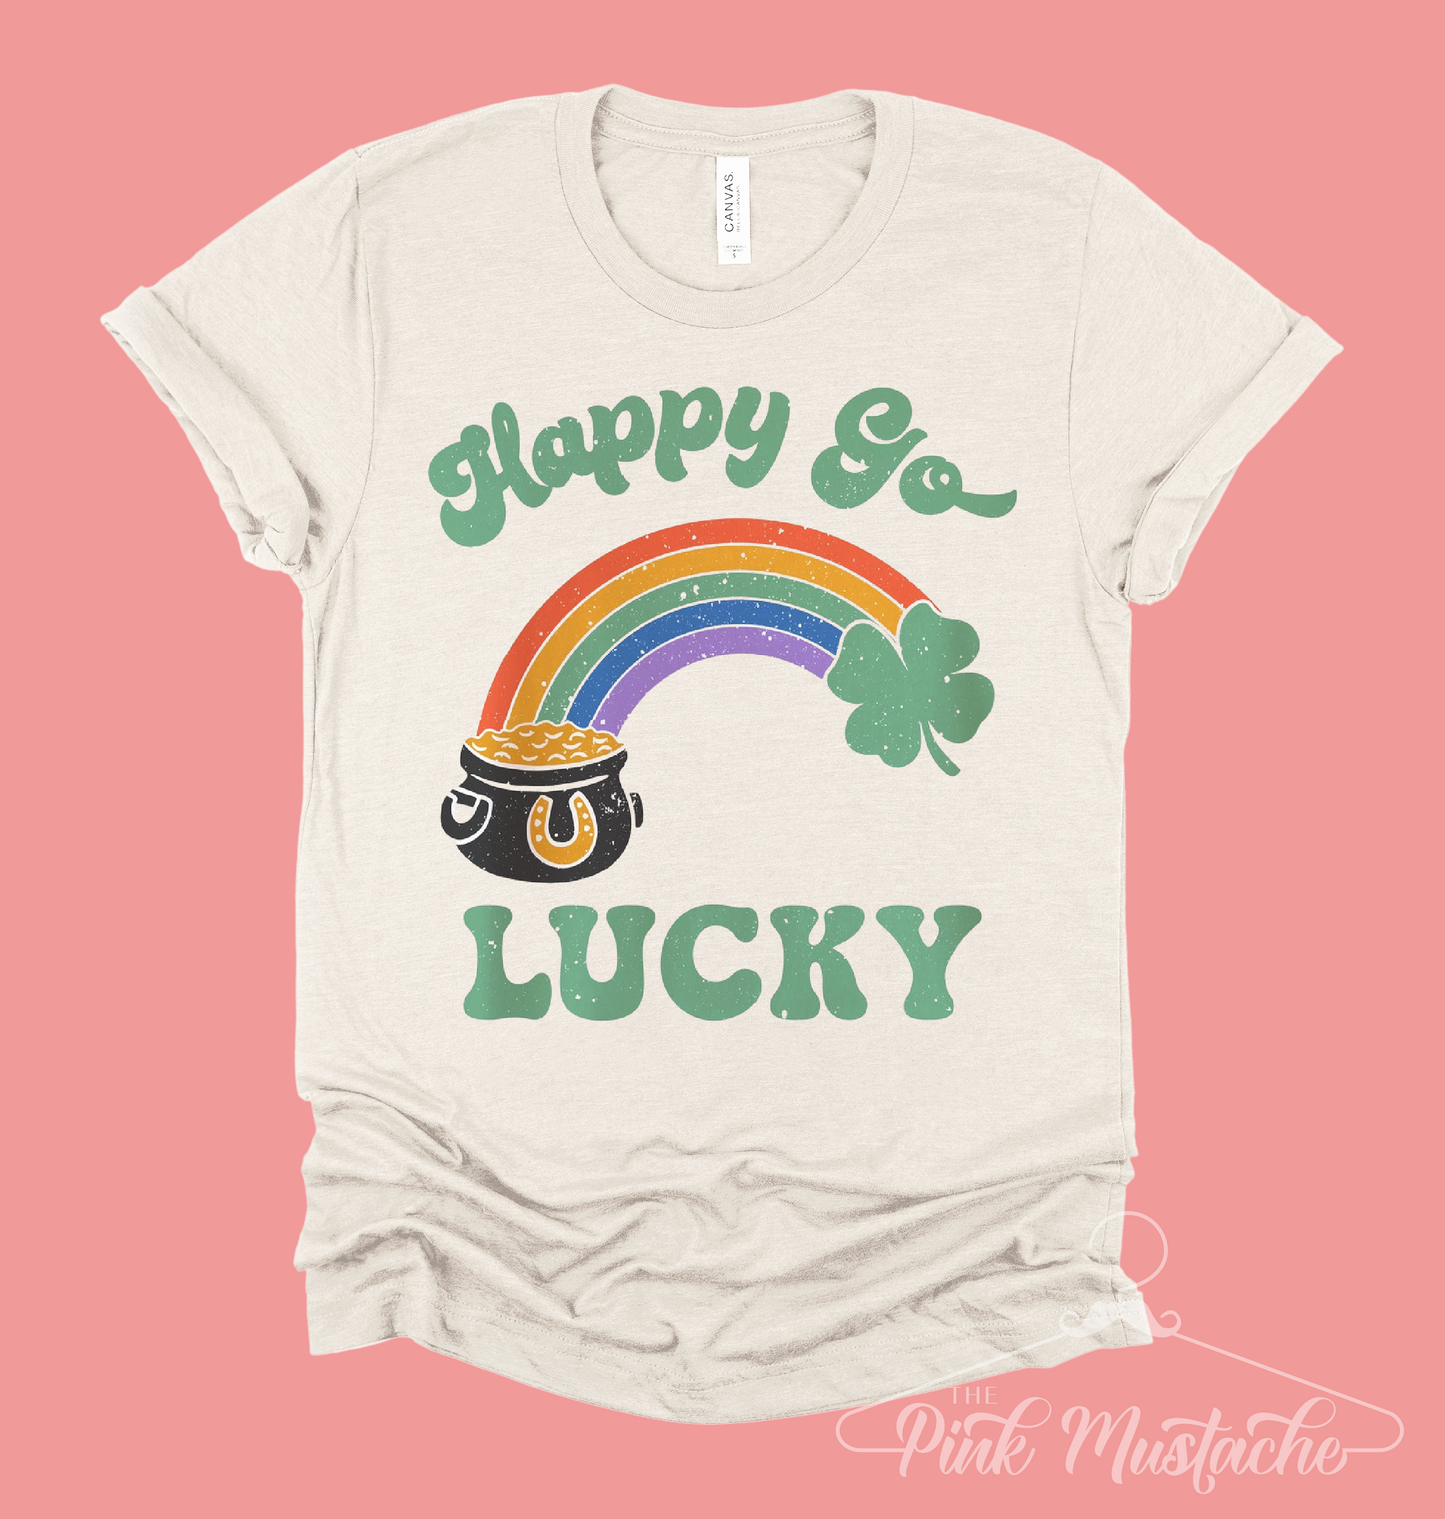 Happy Go Lucky Tee / St. Patrick's Day Shirt / Youth and Adult Sizes Available